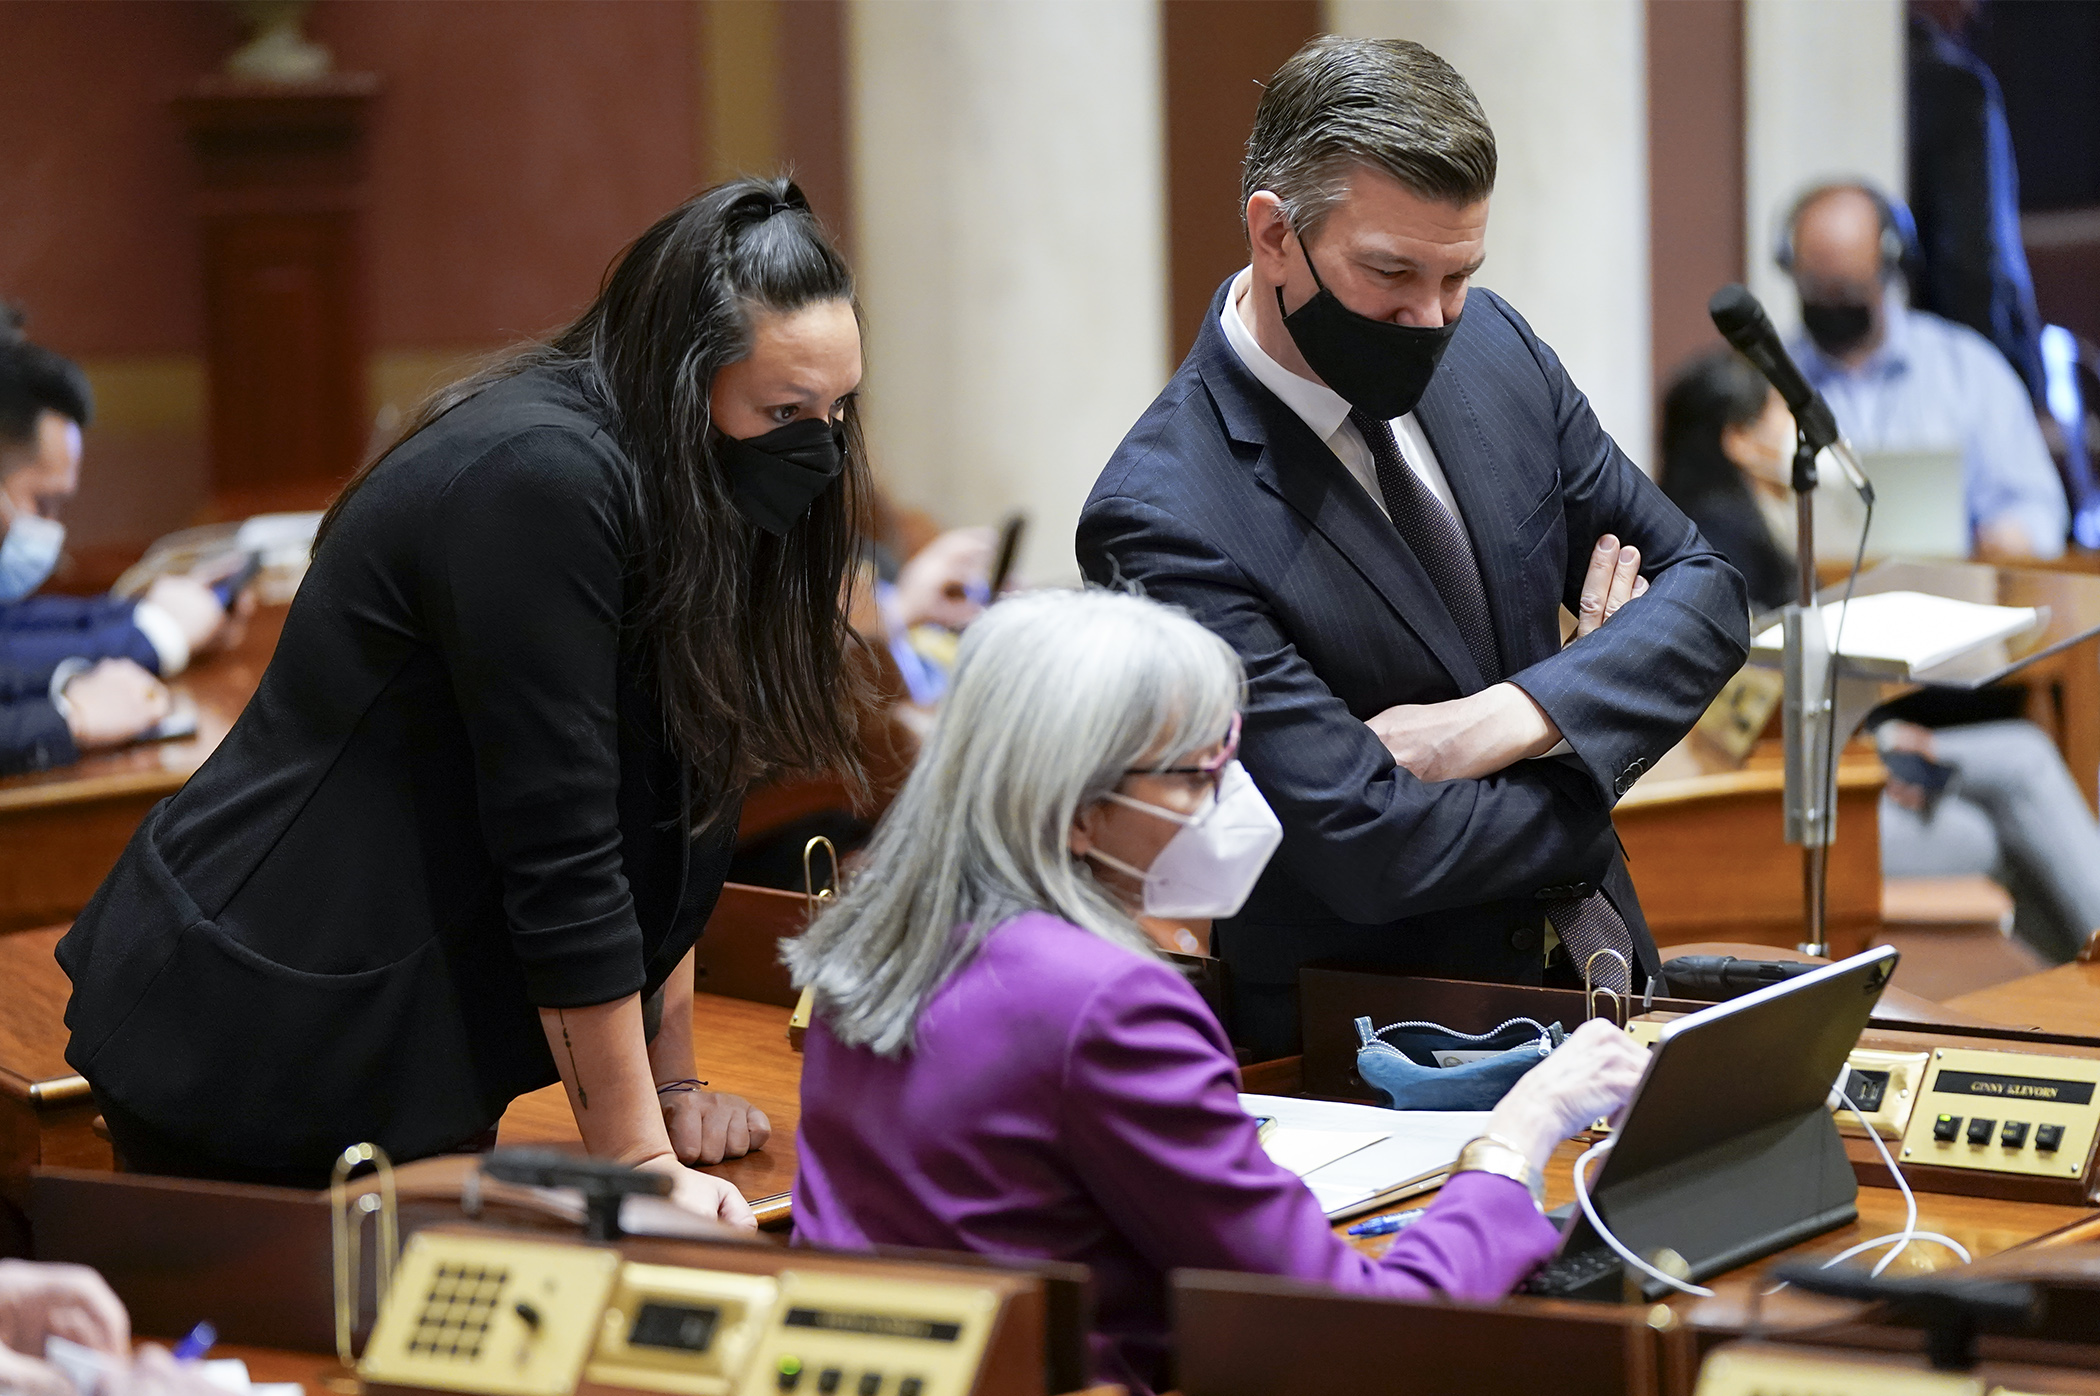 House Majority Leader Ryan Winkler, Rep. Heather Keeler, left, and Rep. Ginny Klevorn look at the state's newly-released legislative and congressional maps during the Feb. 15 floor session. (Photo by Paul Battaglia)